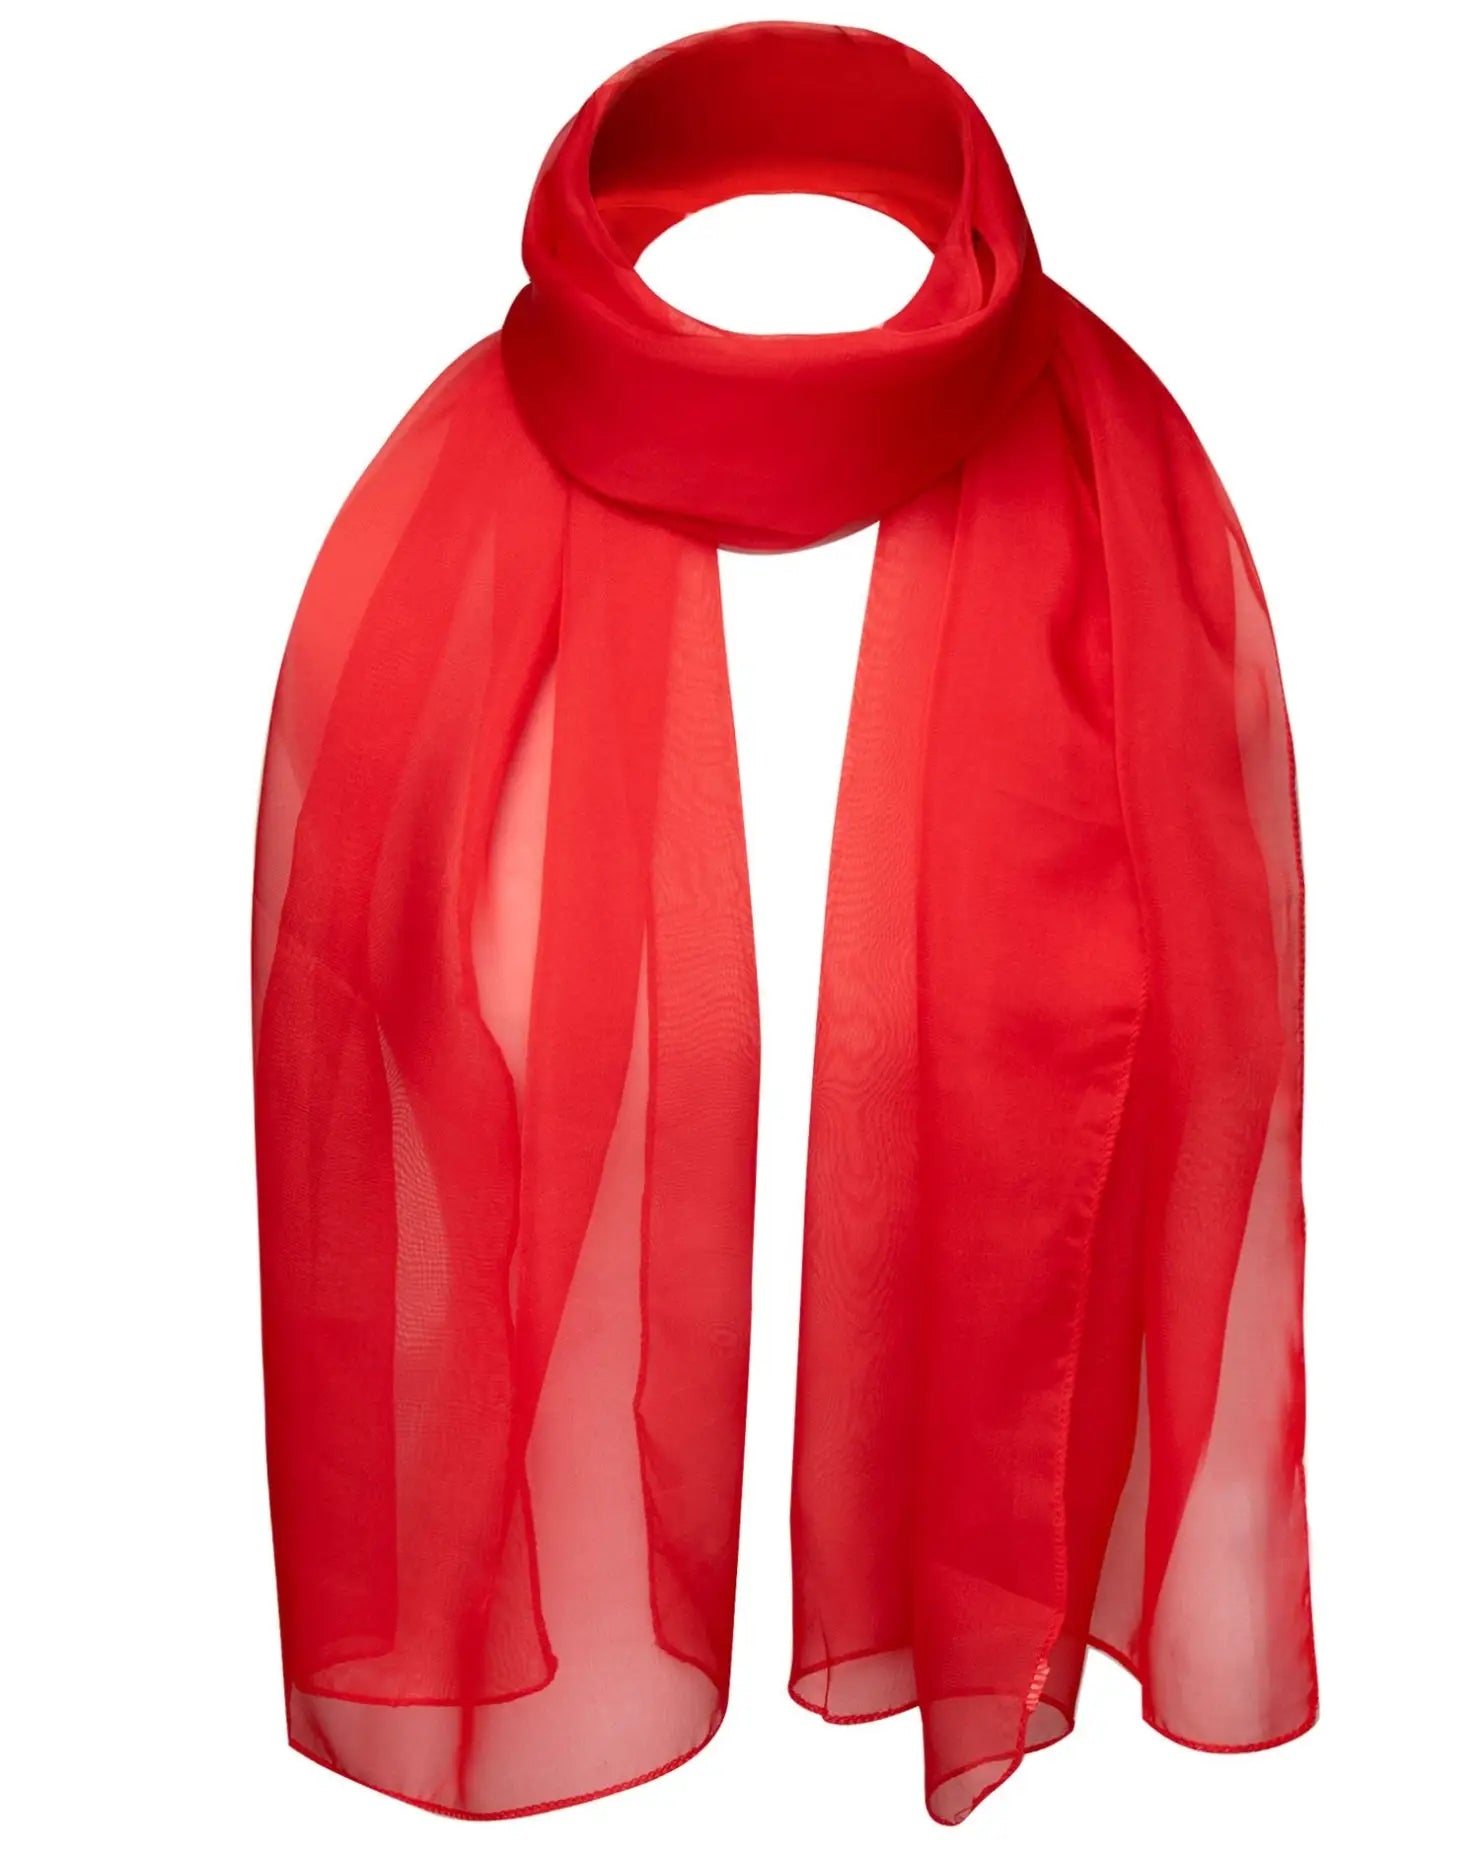 Classic Plain Chiffon Scarf in Red Color